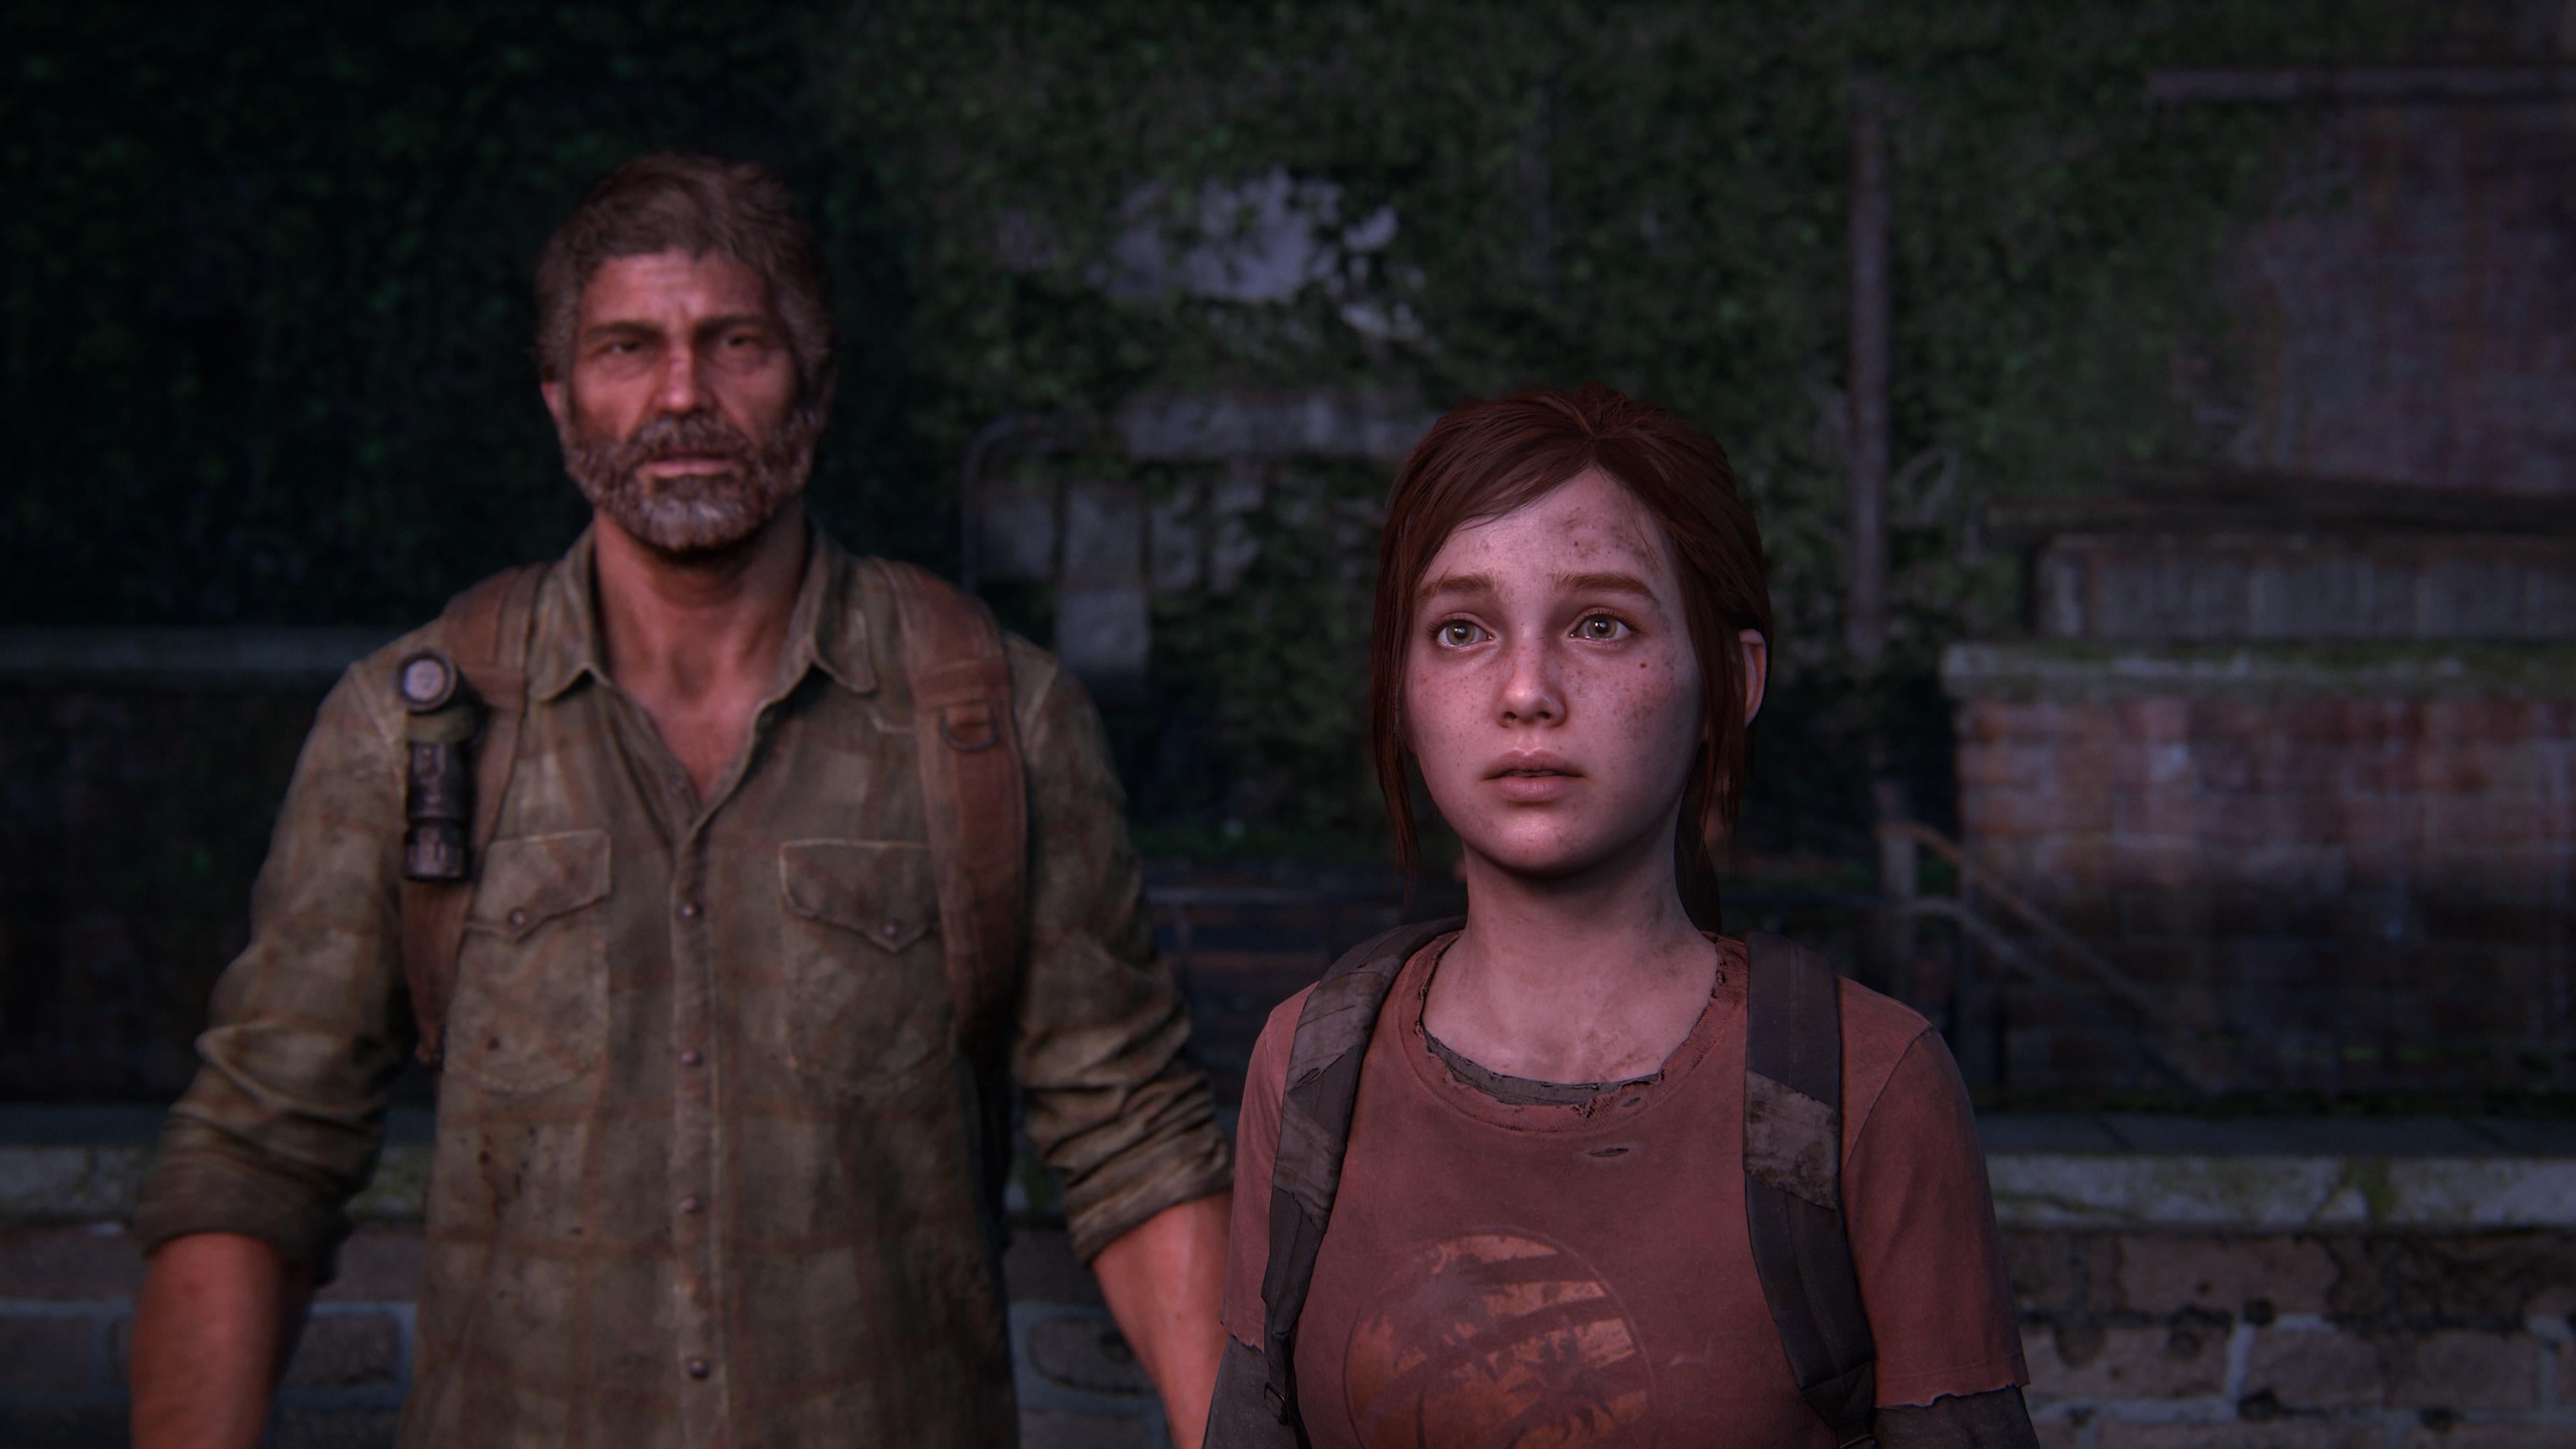 The Last of Us: Part I Compares Tess on PS5 vs. PS3 Model, and the